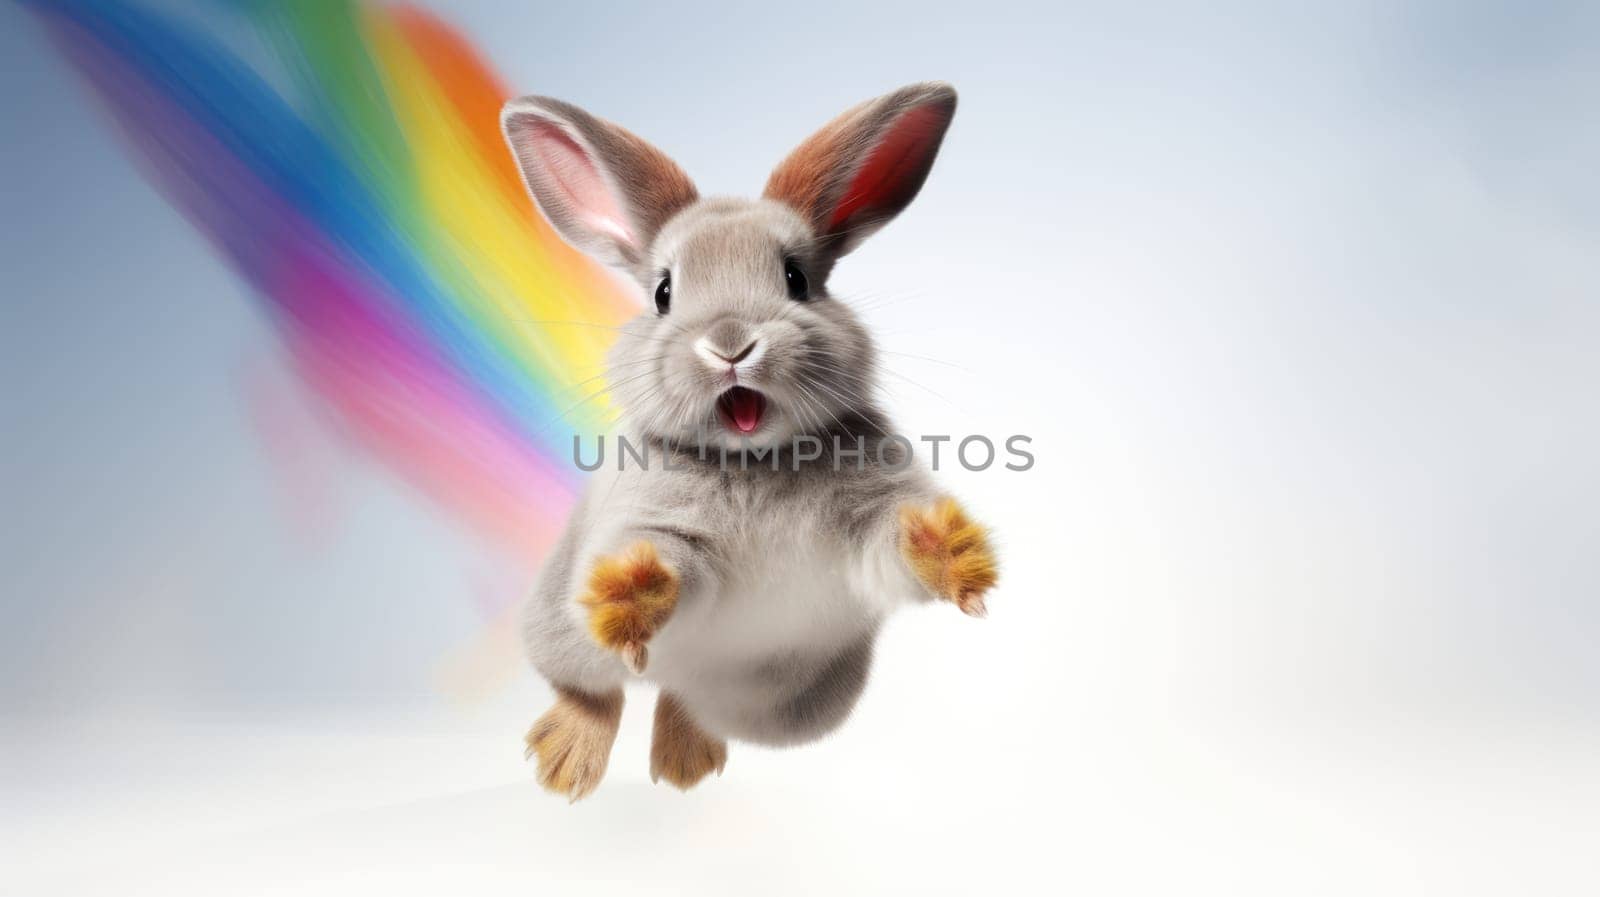 Adorable bunny happily hopping on white clouds under a vibrant rainbow by JuliaDorian